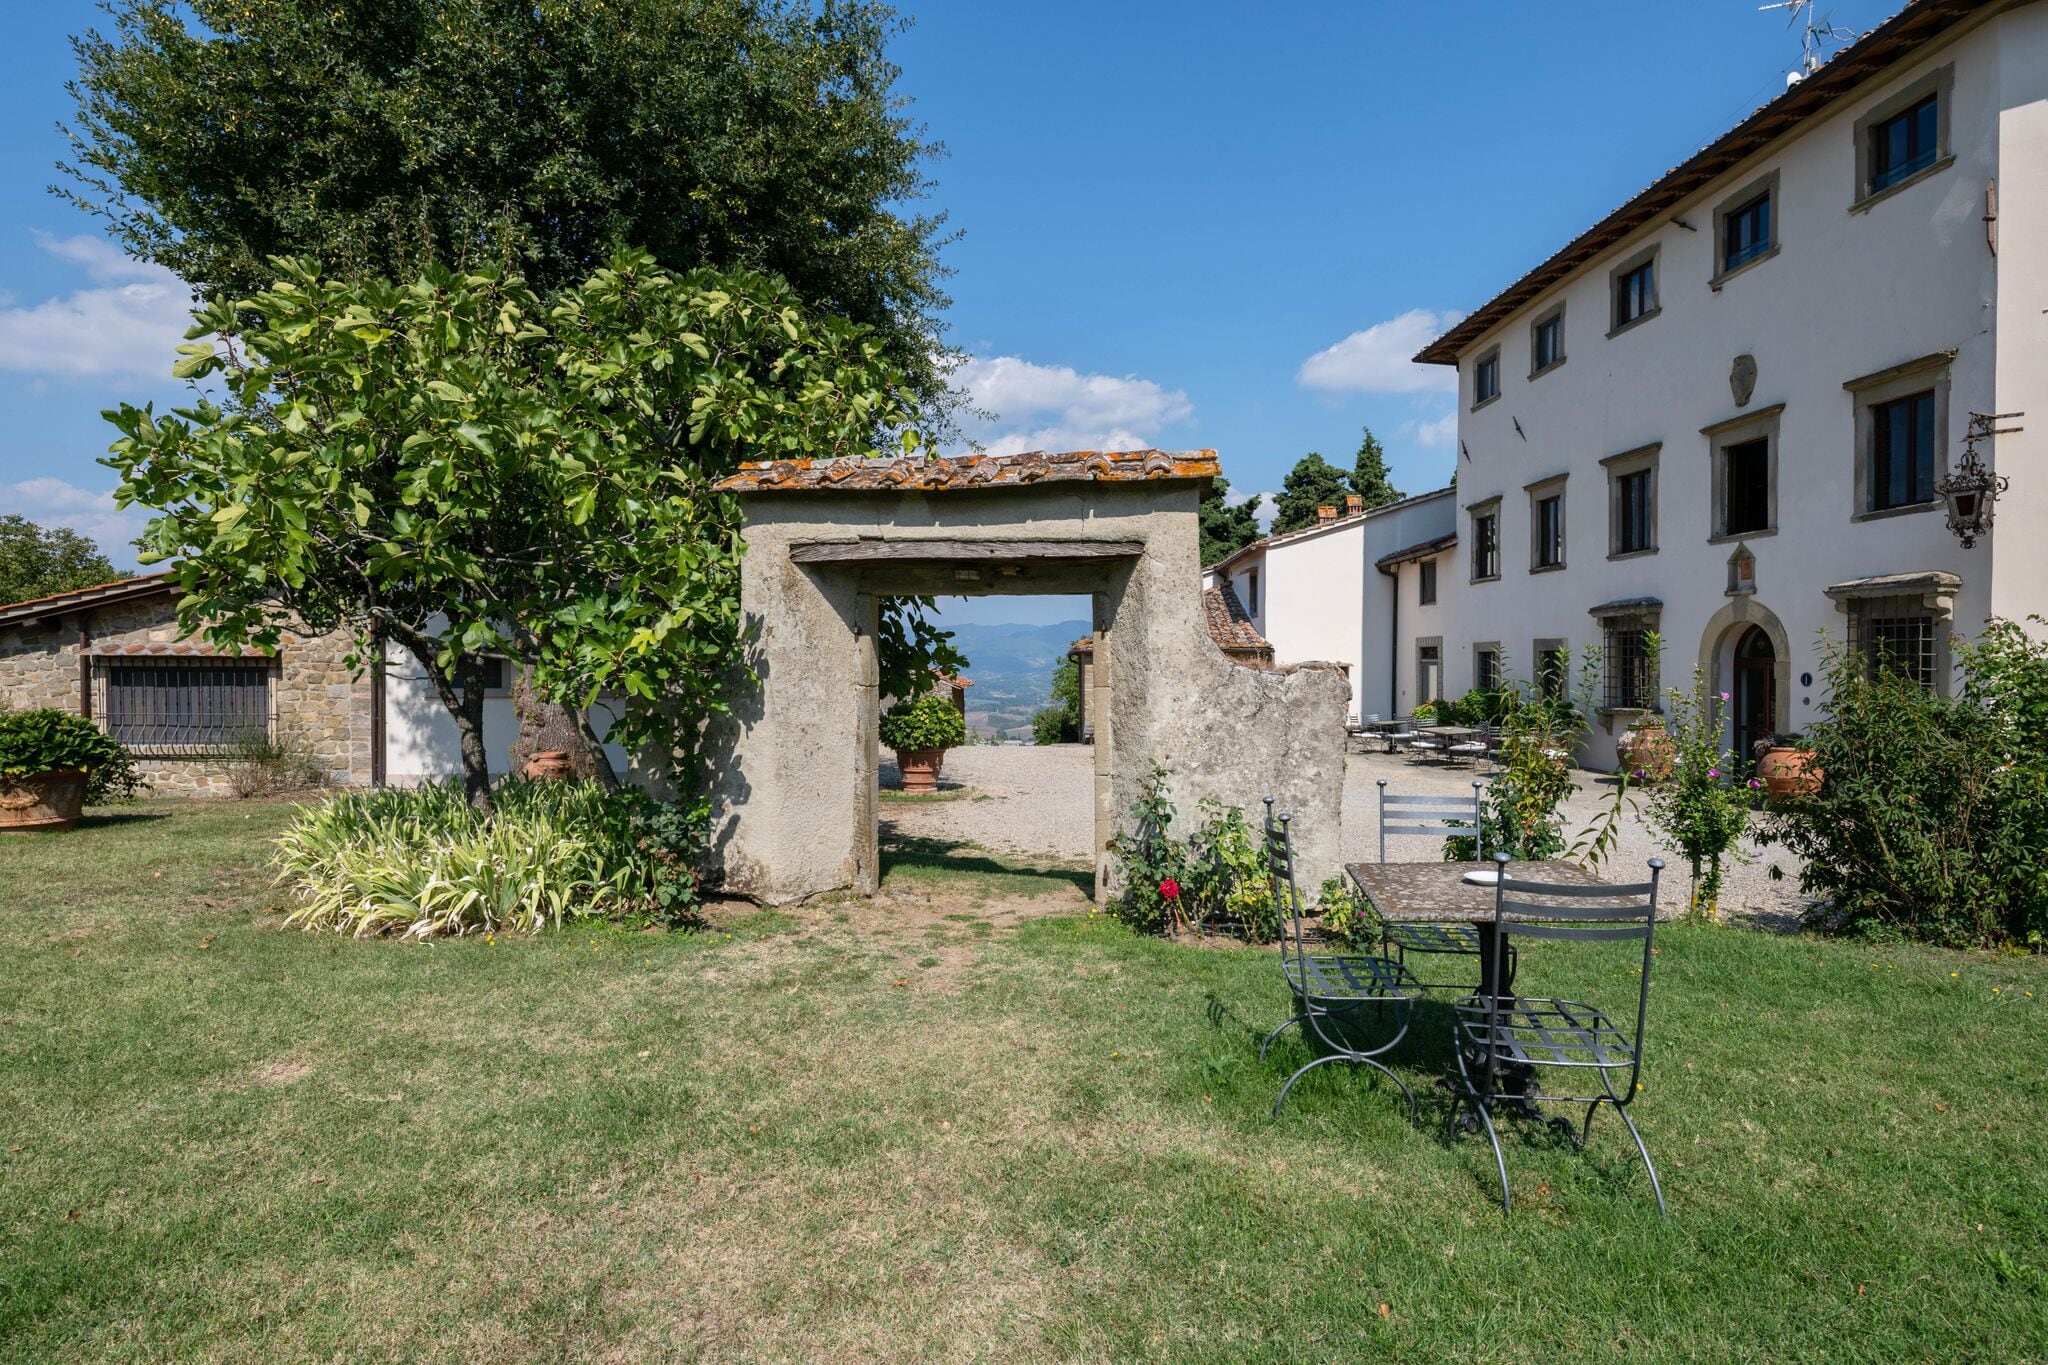 Renaissance villa in the heart of the Mugello, 35 km from Florence.